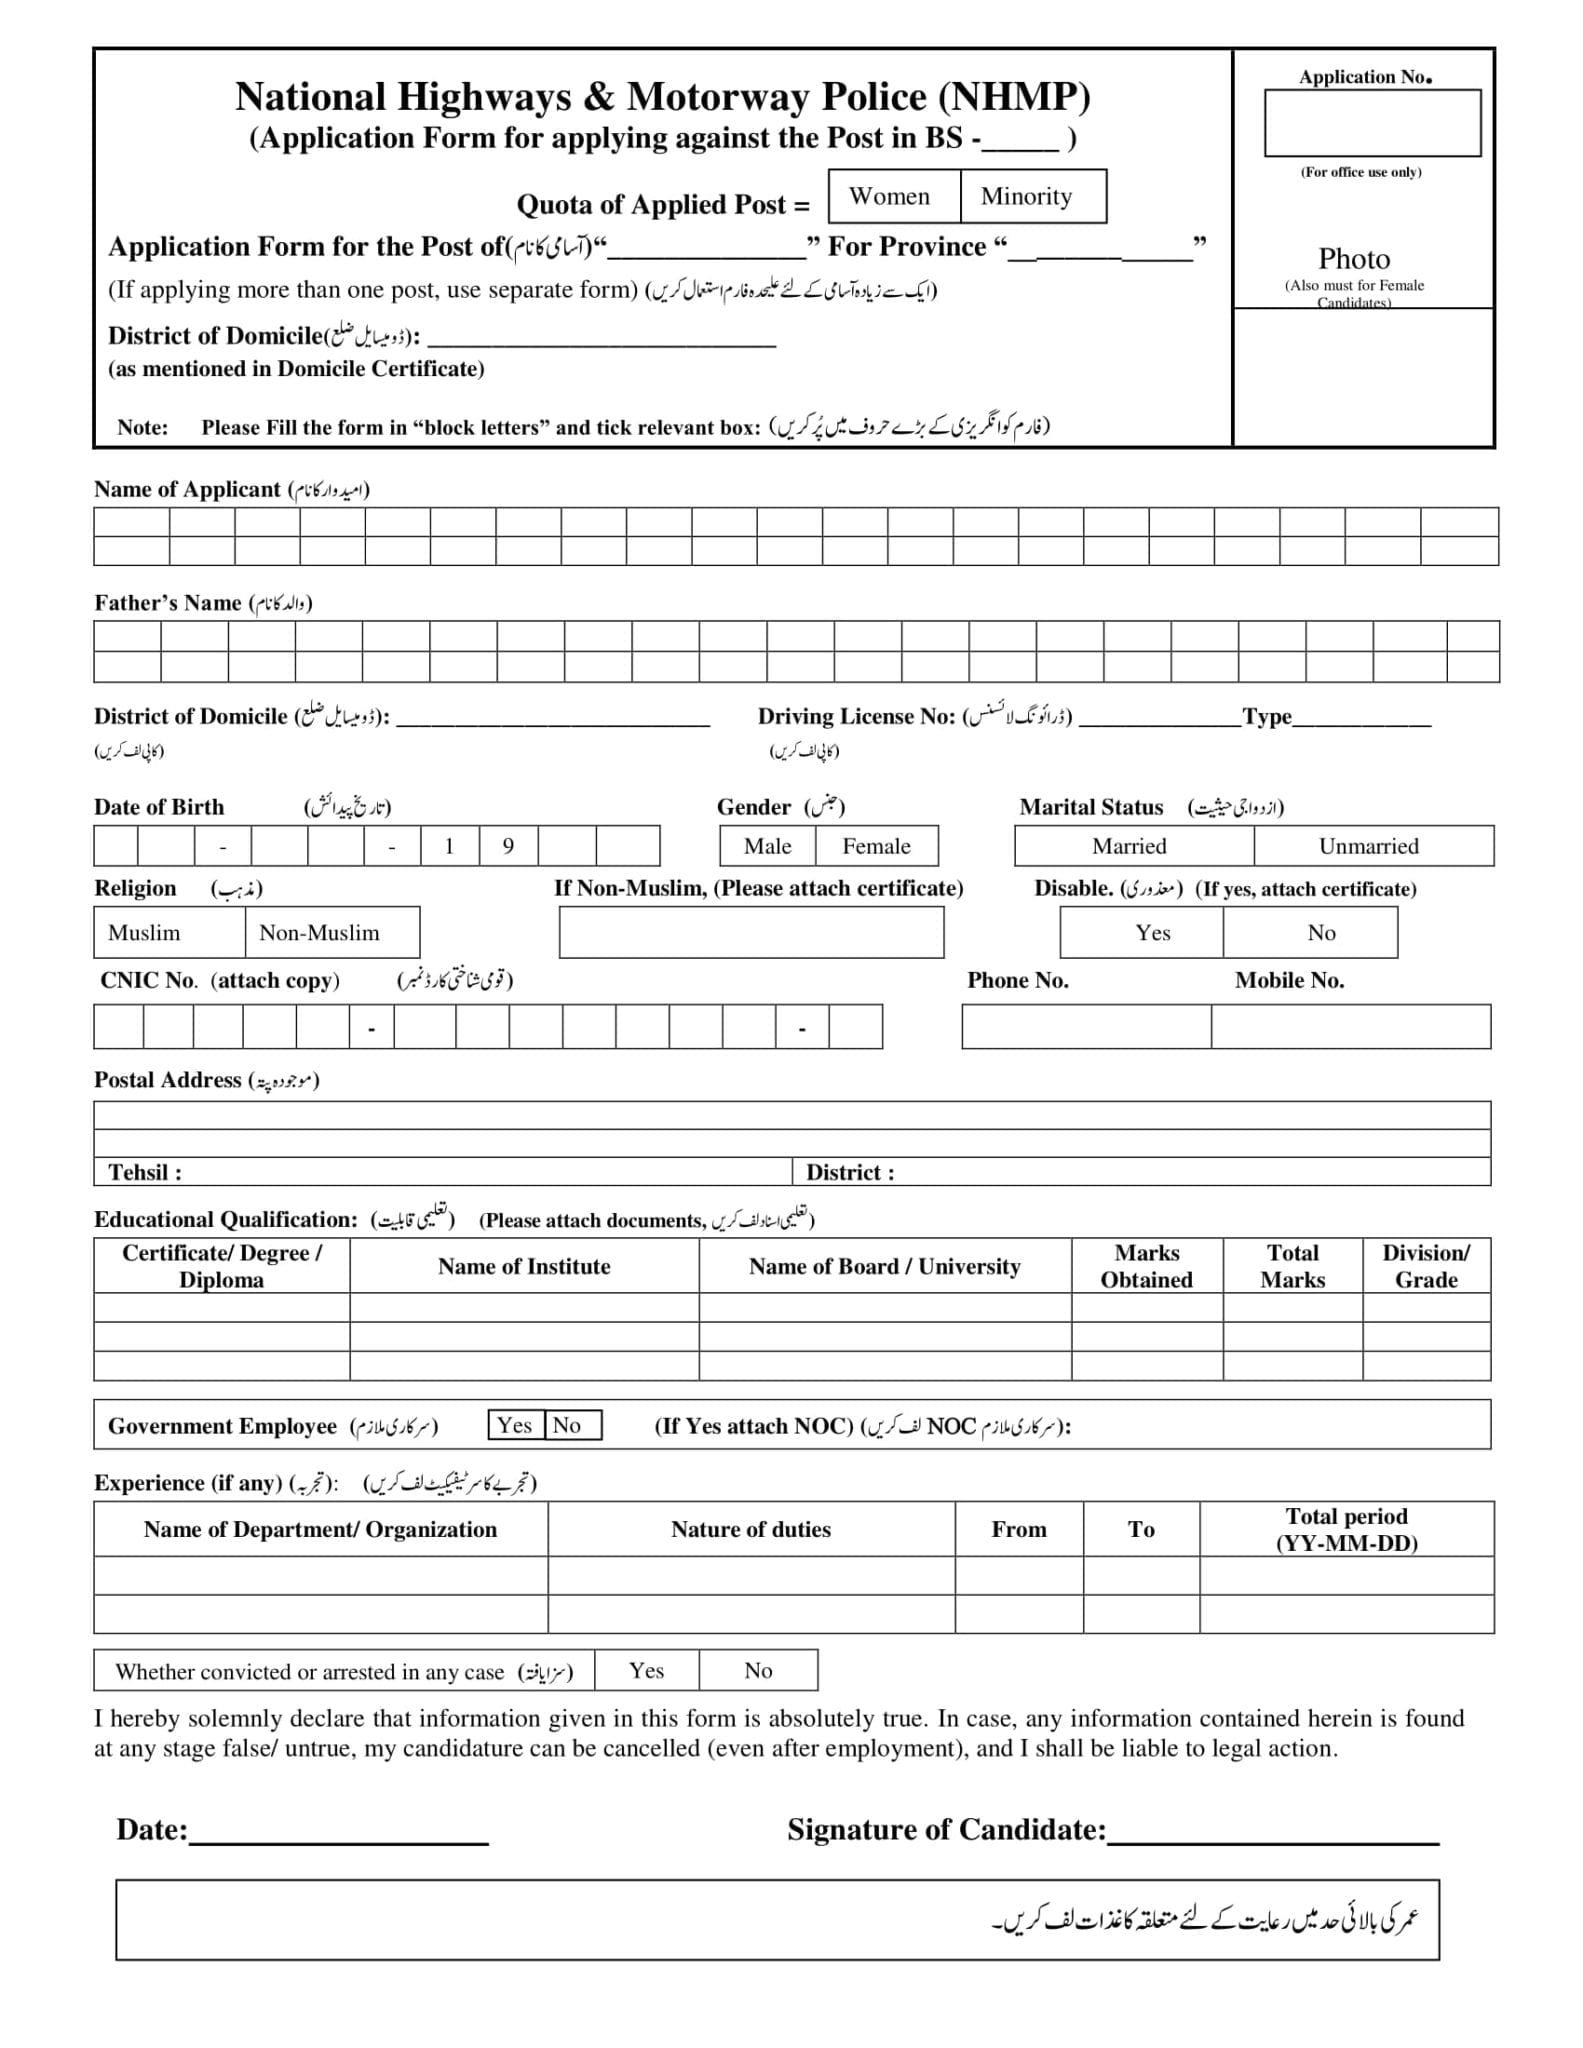 Application Form for Posts in BS 01 05 New 1 scaled